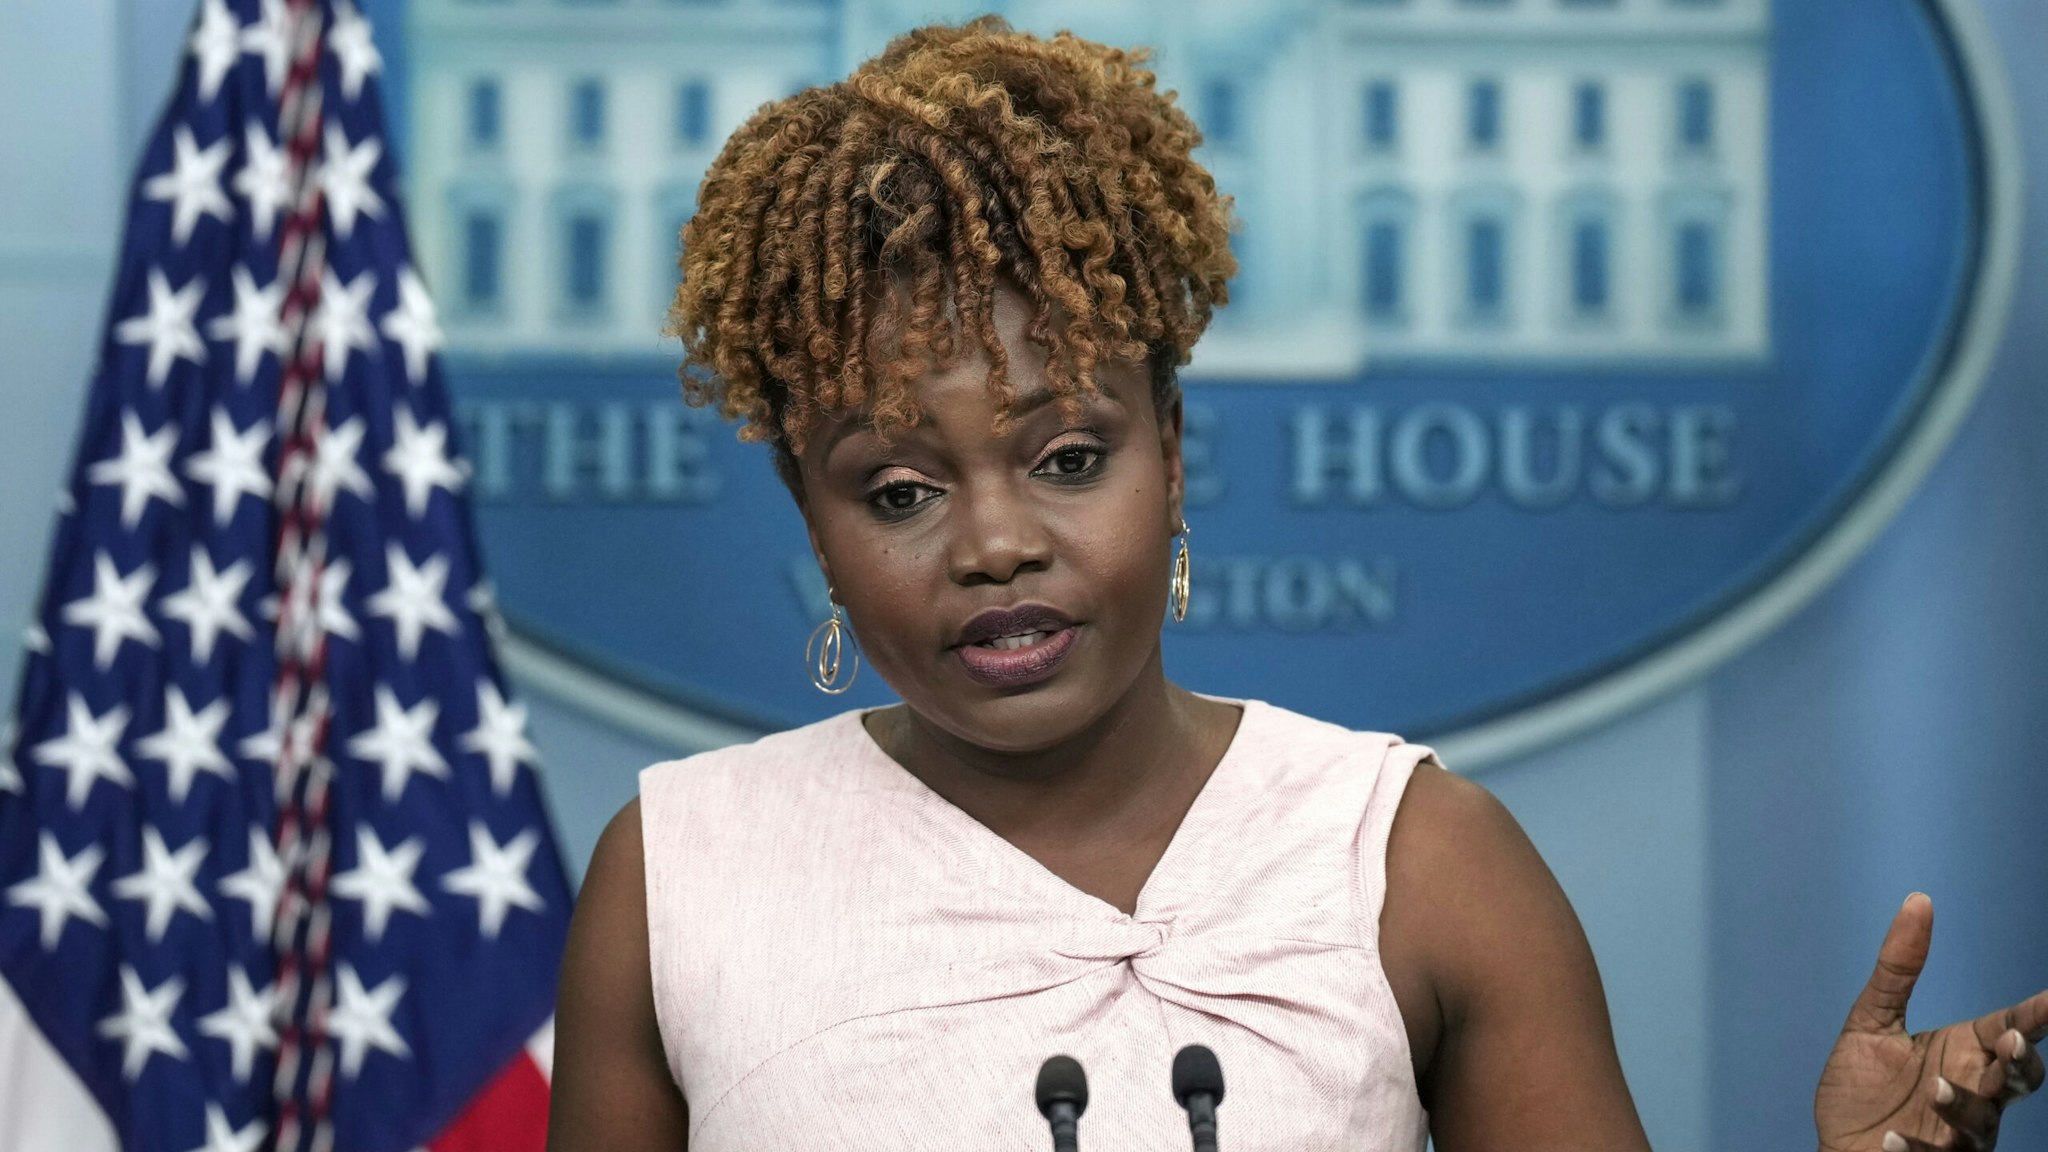 WASHINGTON, DC - JULY 5: White House Press Secretary Karine Jean-Pierre speaks during the daily press briefing at the White House July 5, 2023 in Washington, DC. U.S. President Joe Biden is meeting with Swedish Prime Minister Ulf Kristersson at the White House today.